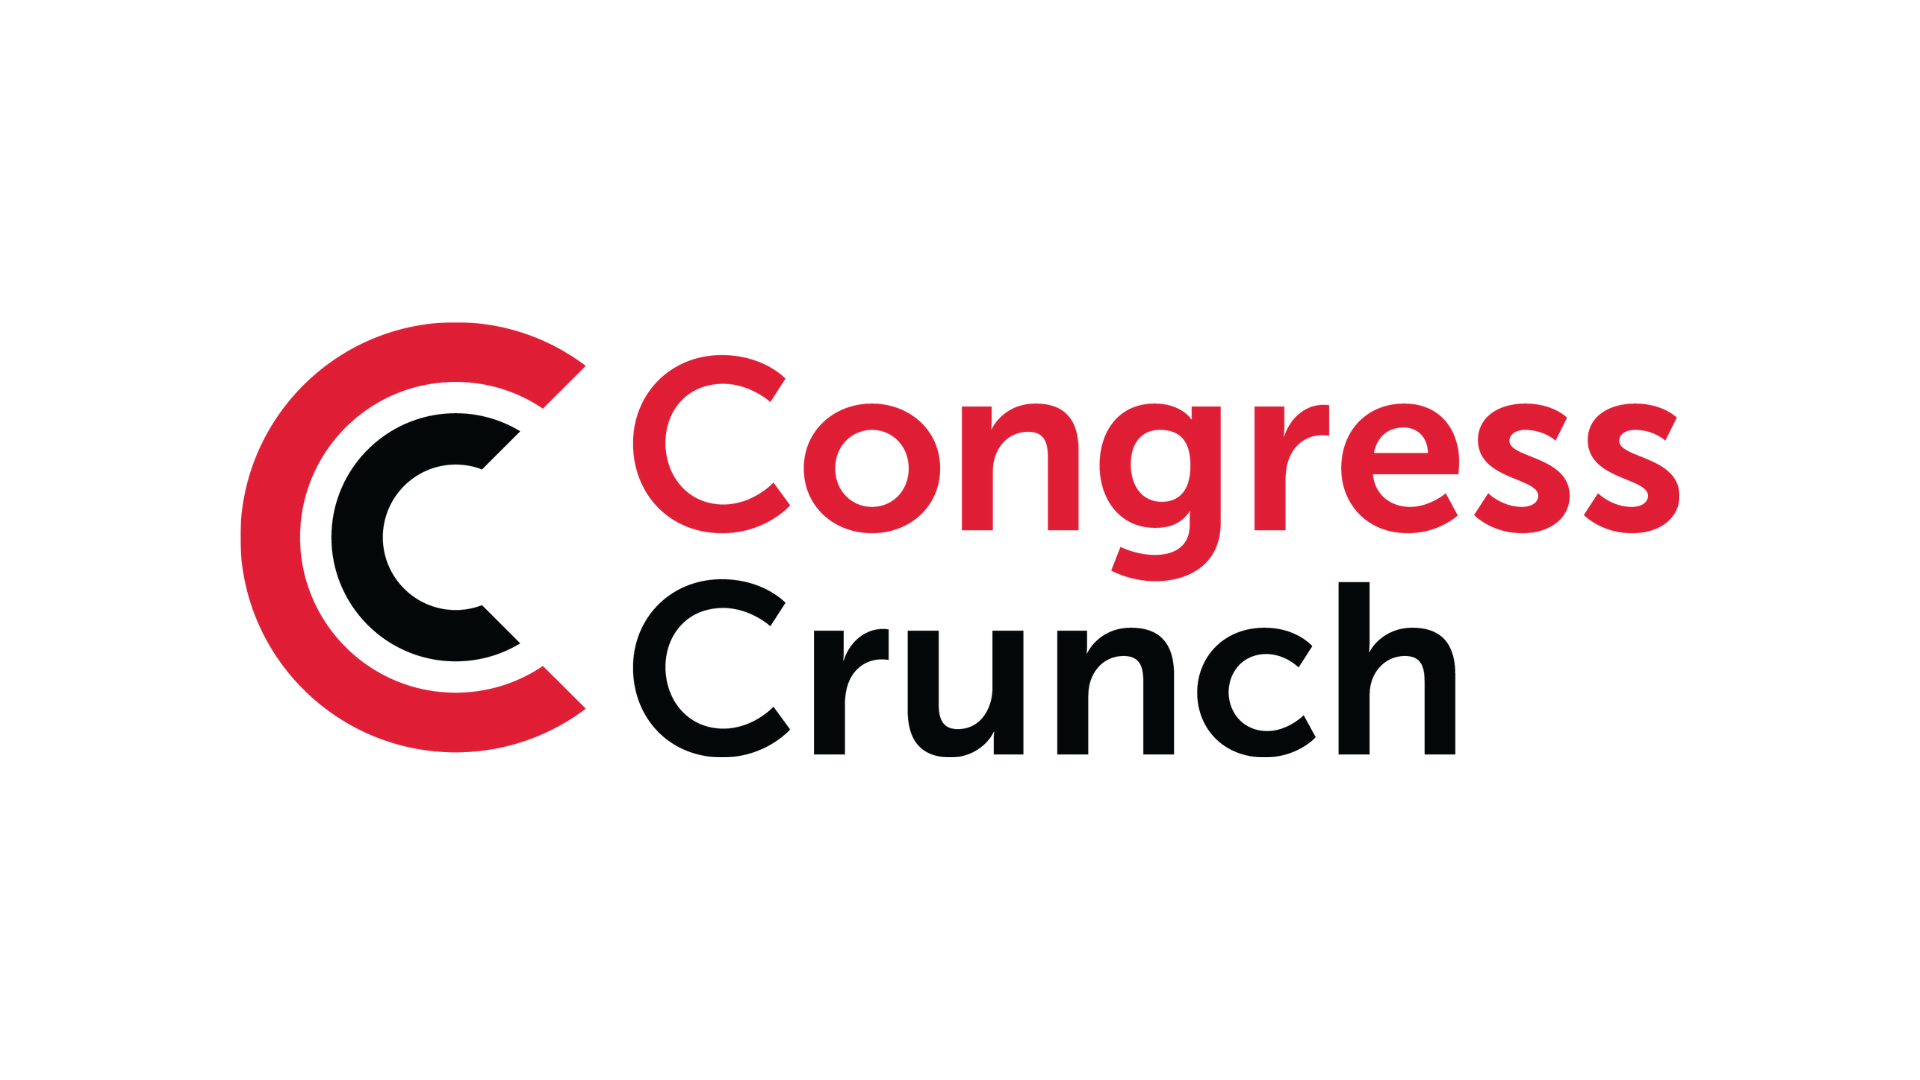 CCgroup’s Congress Crunch: Your ultimate MWC 2018 networking event guide